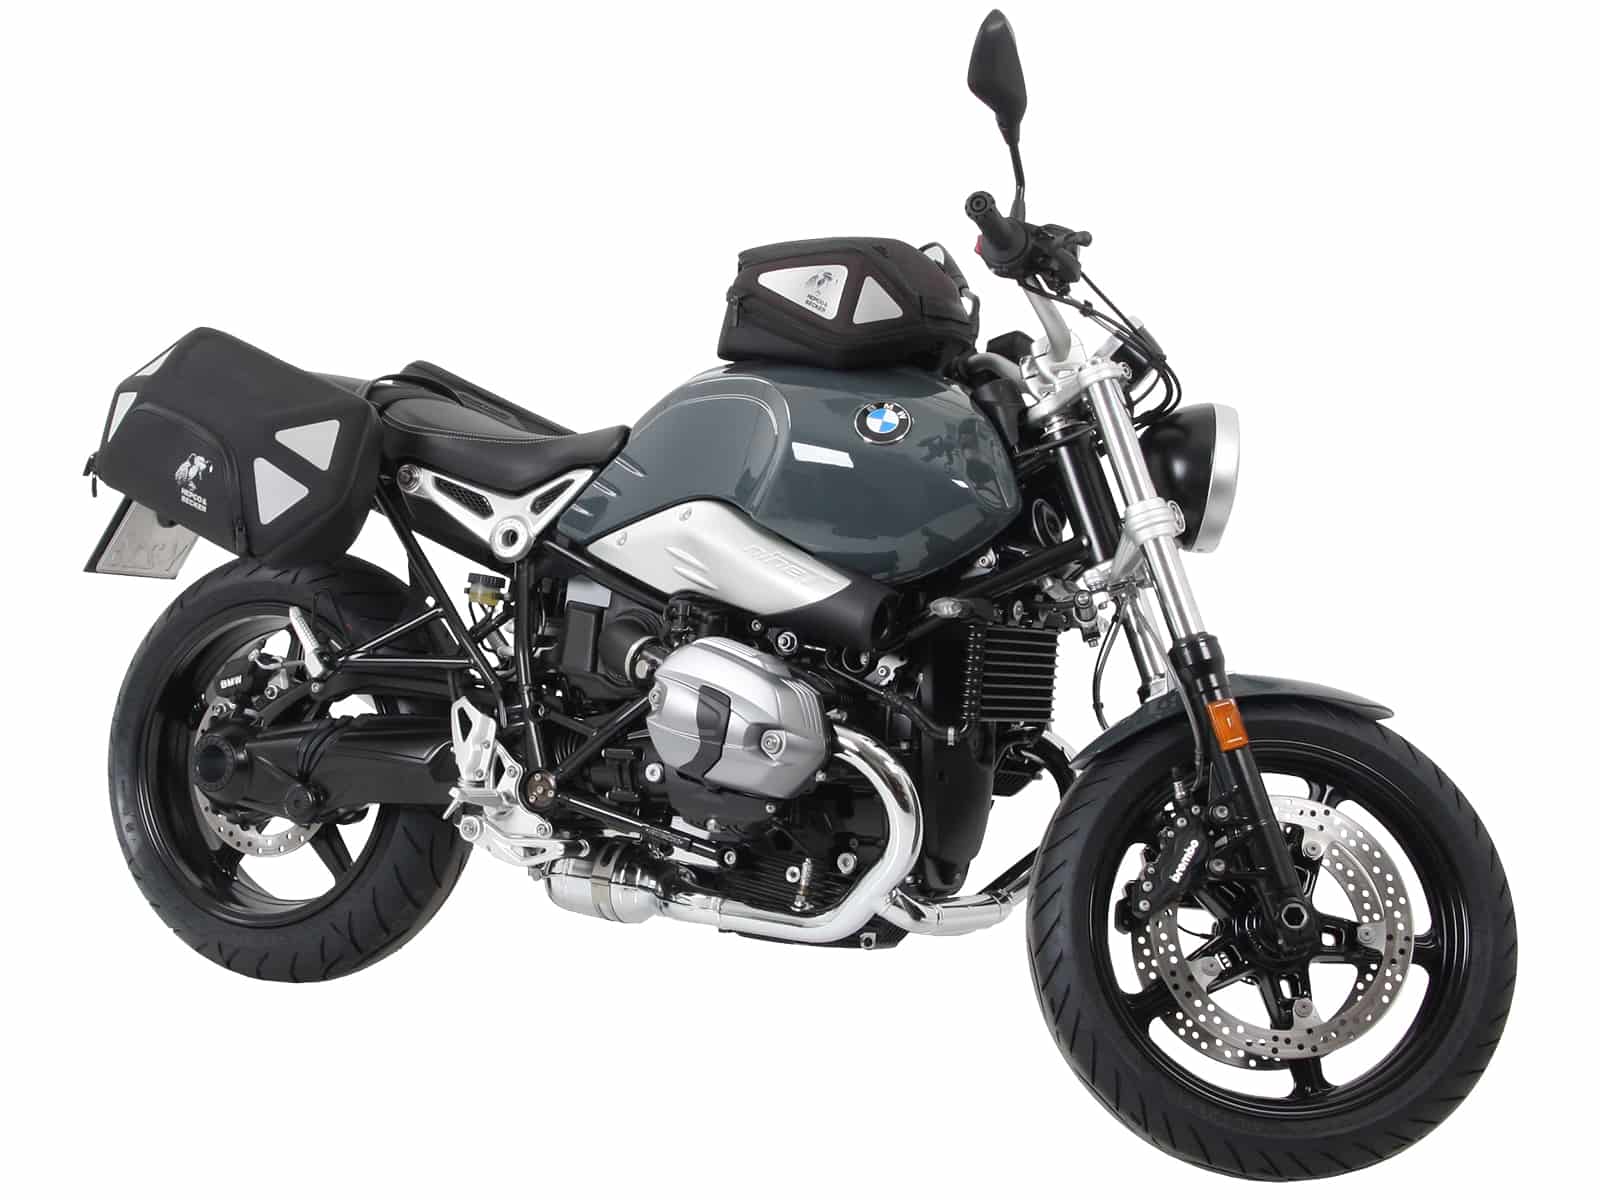 C-Bow sidecarrier for BMW R nineT Pure (2017-2023)